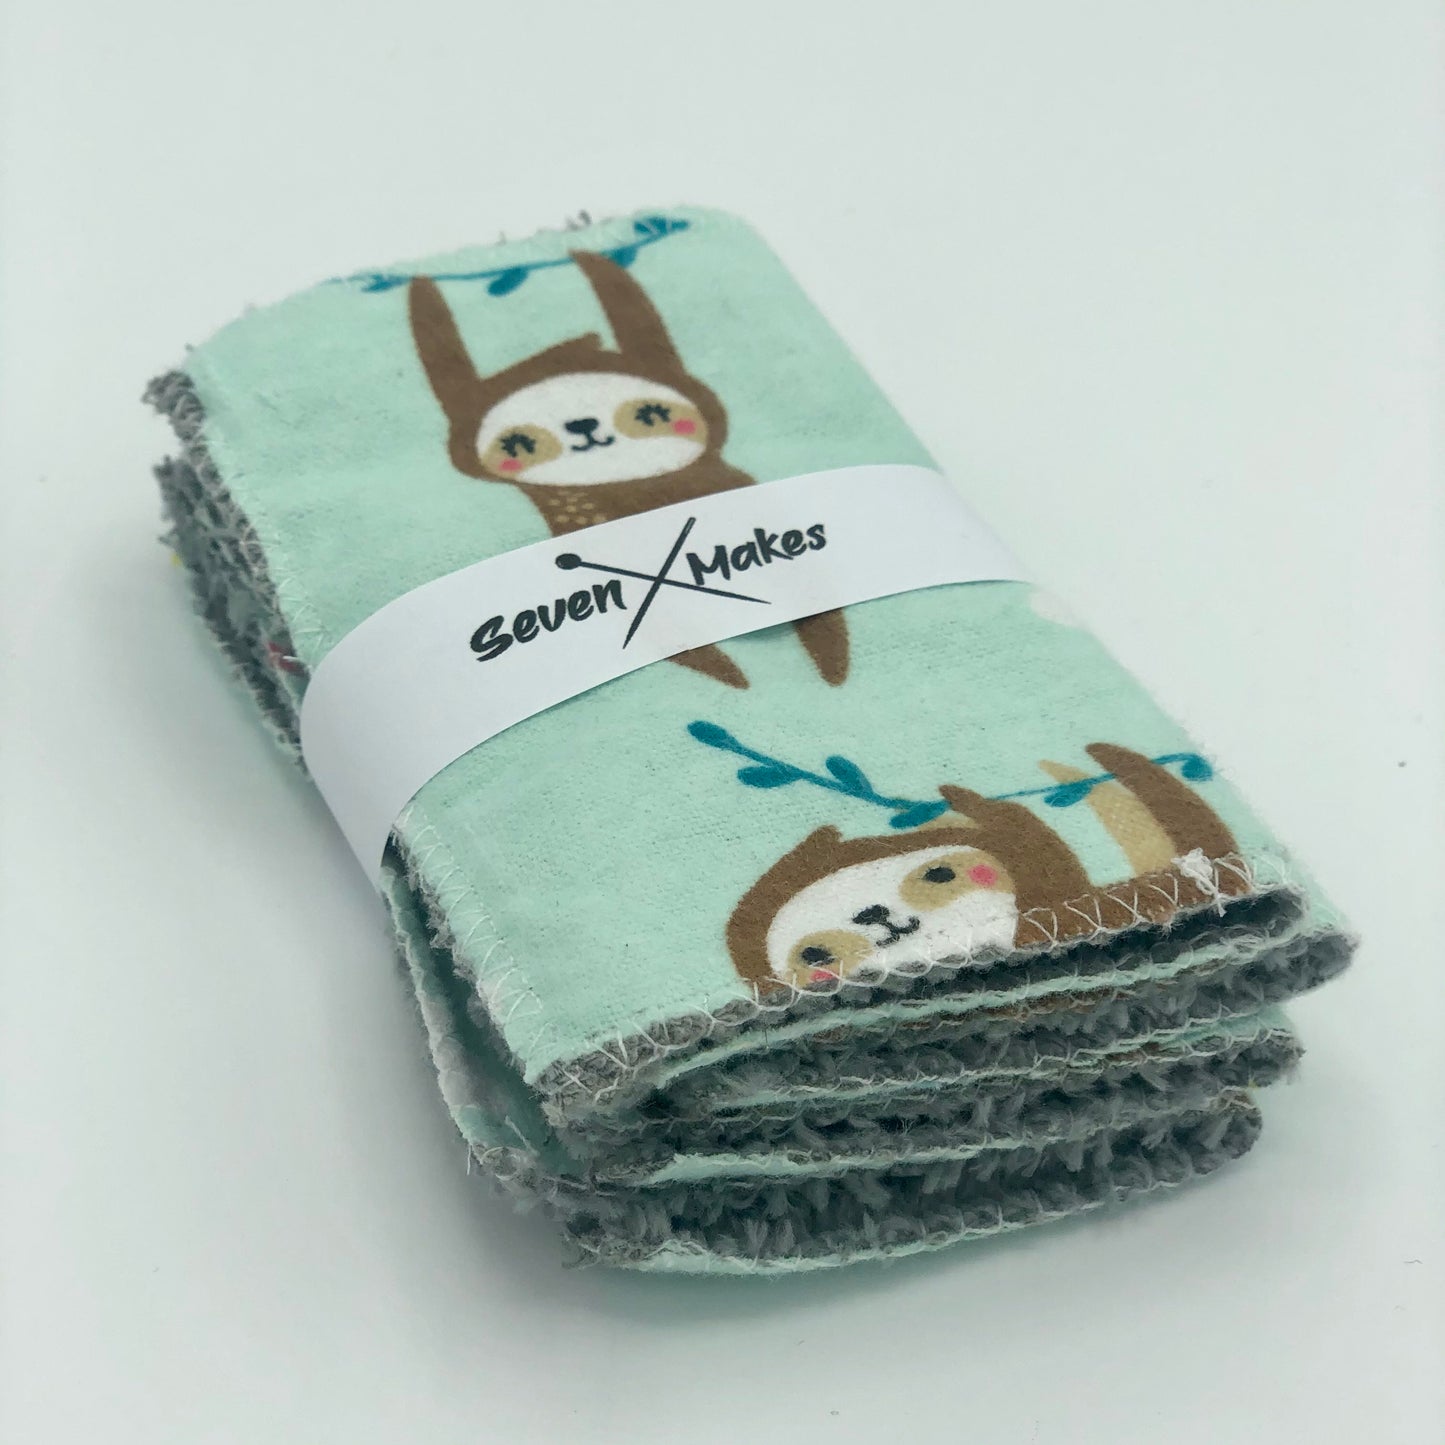 Bamboo Mucky Pup Wipes - Eco-Friendly Reusable Wipes for Kids of all Ages!